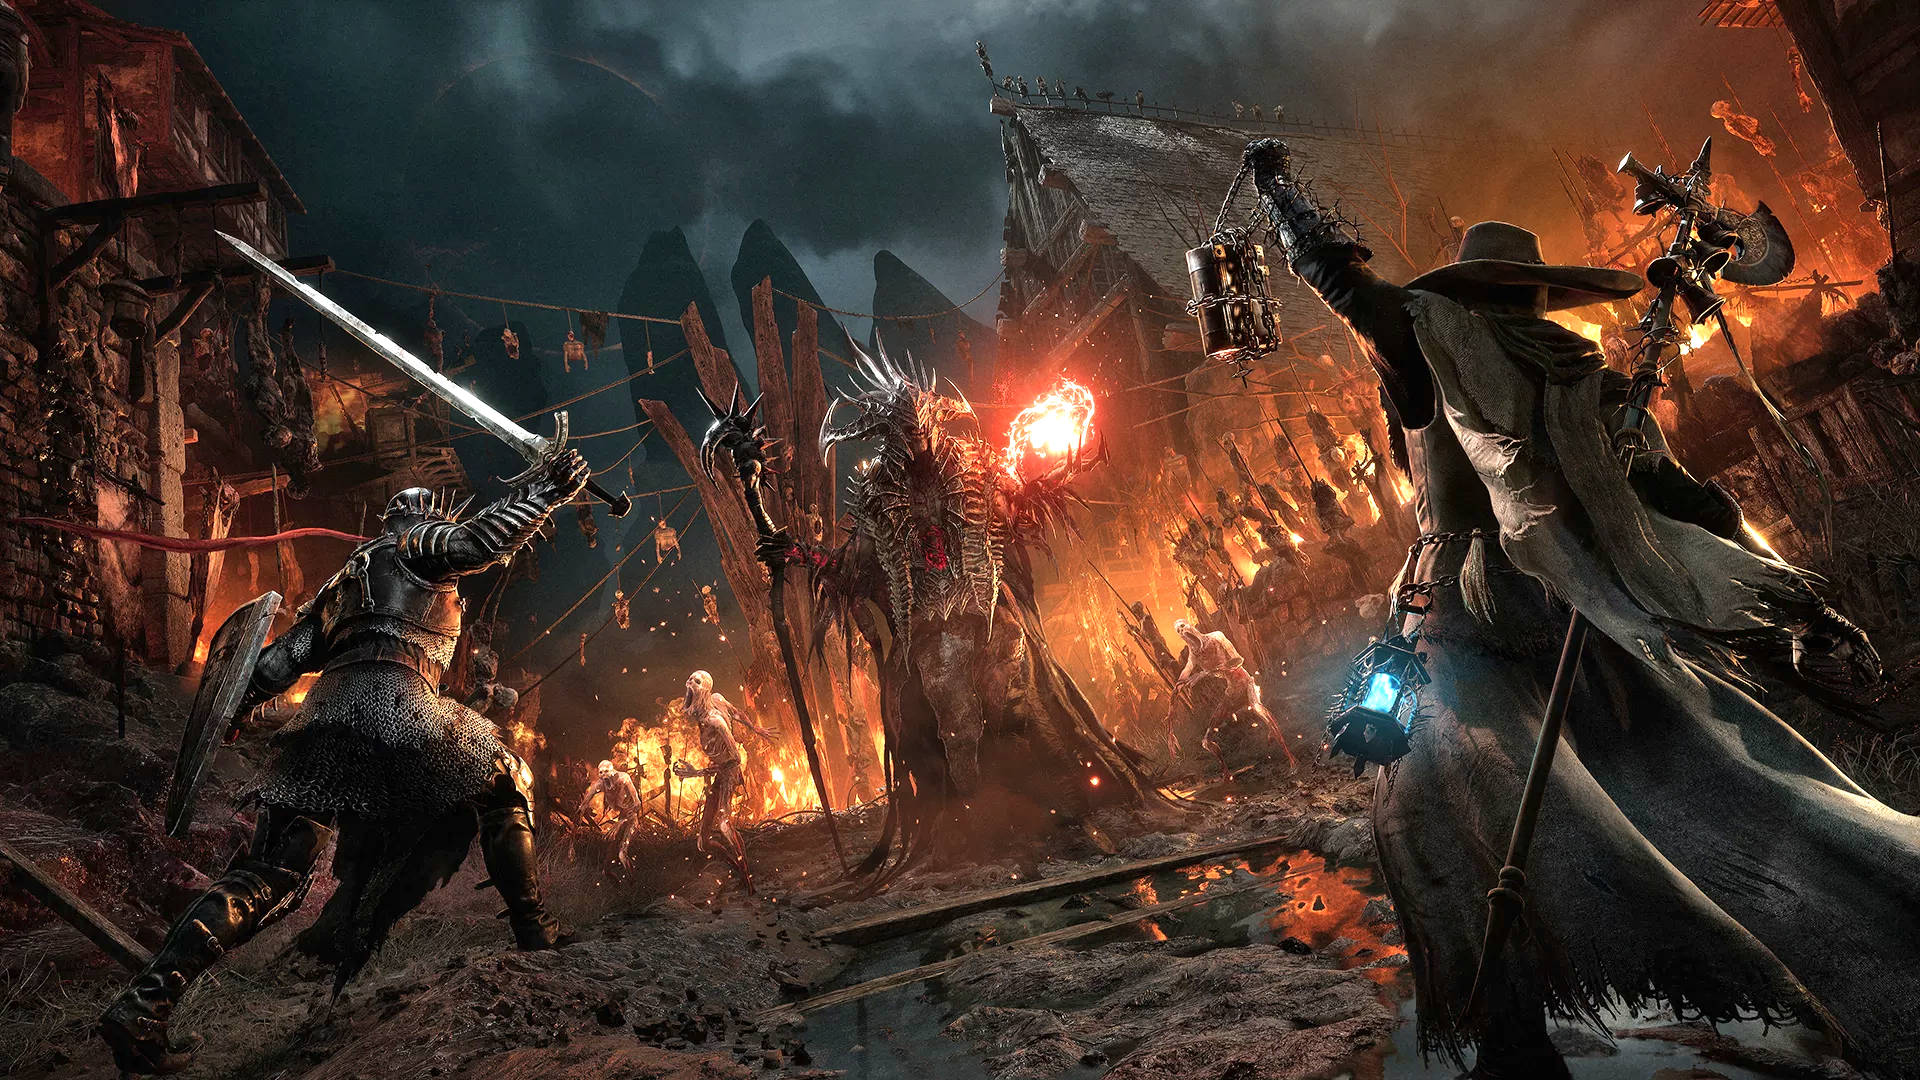 How to fix Lords of the Fallen Multiplayer Not Working (all issues